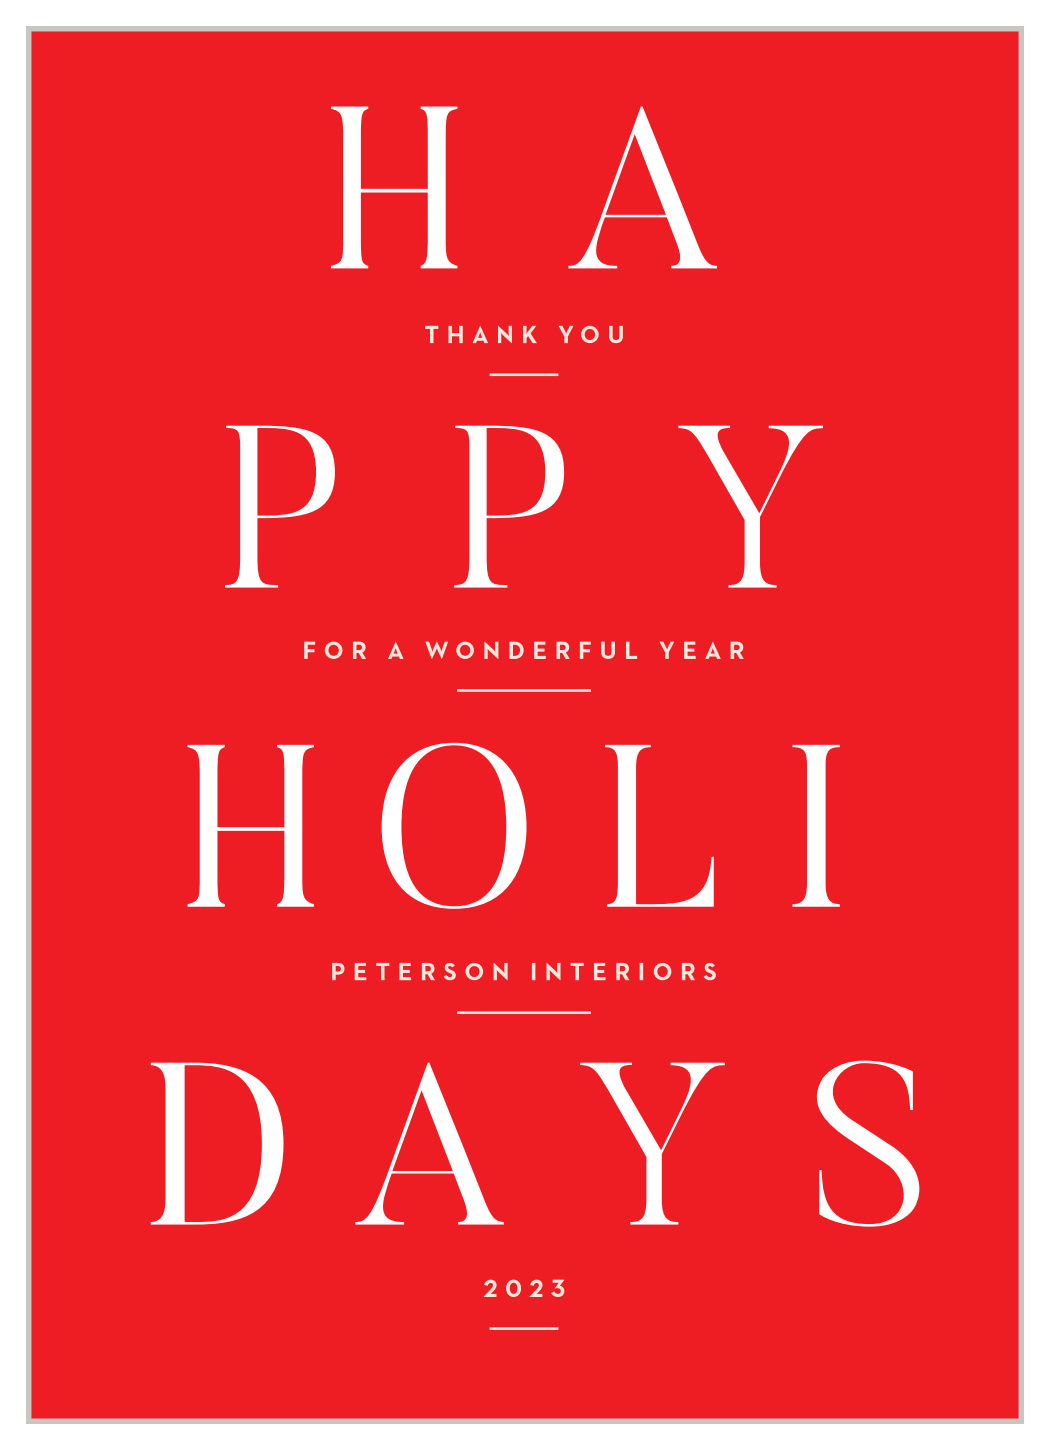 Editorial Type Corporate Holiday Cards